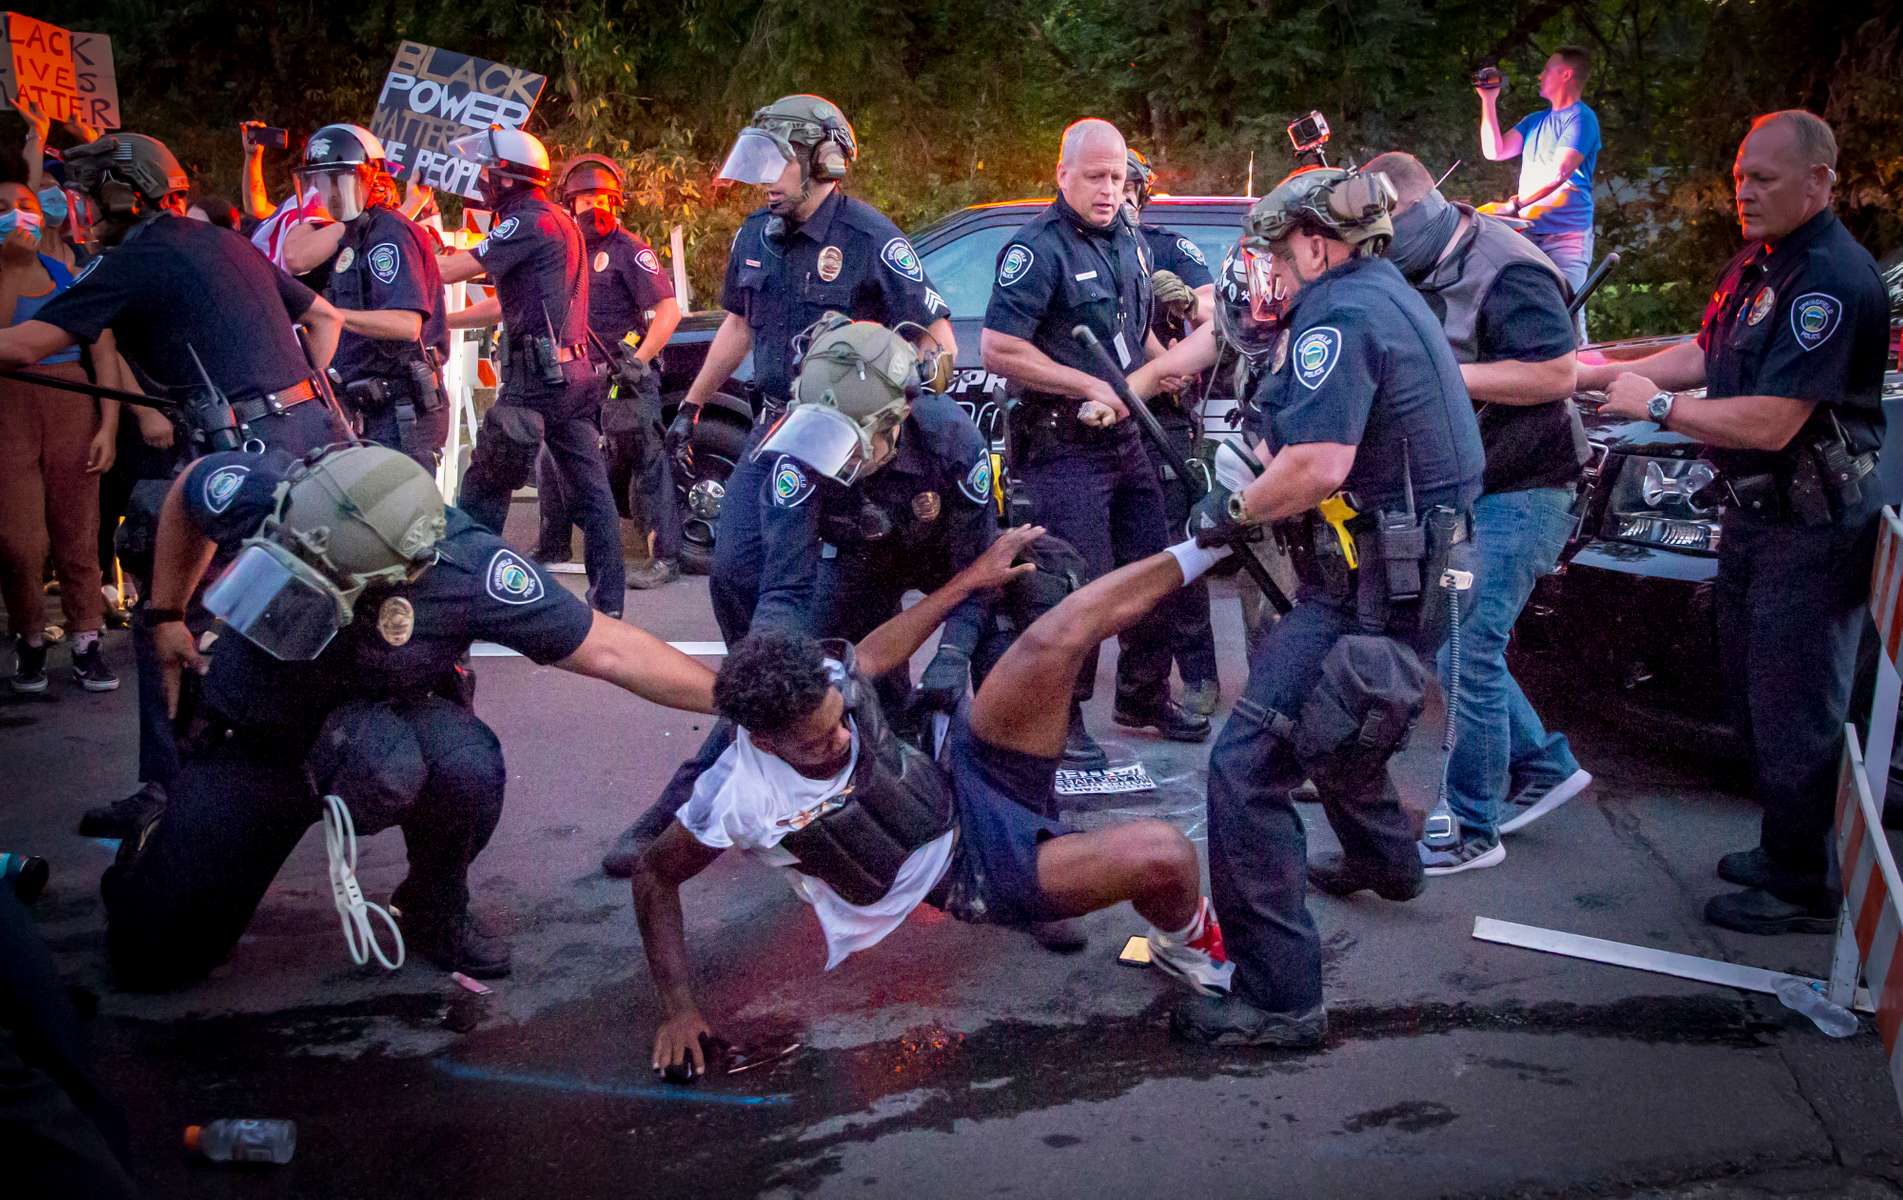 Tyshawn Ford, a leader of Black Unity, is dragged away by Springfield Police Wednesday at a barricade erected by police during a protest by the racial justice group in the Springfield, Ore. July 29, 2020. Ford was charged with disorderly conduct, interfering with police, and resisting arrest.